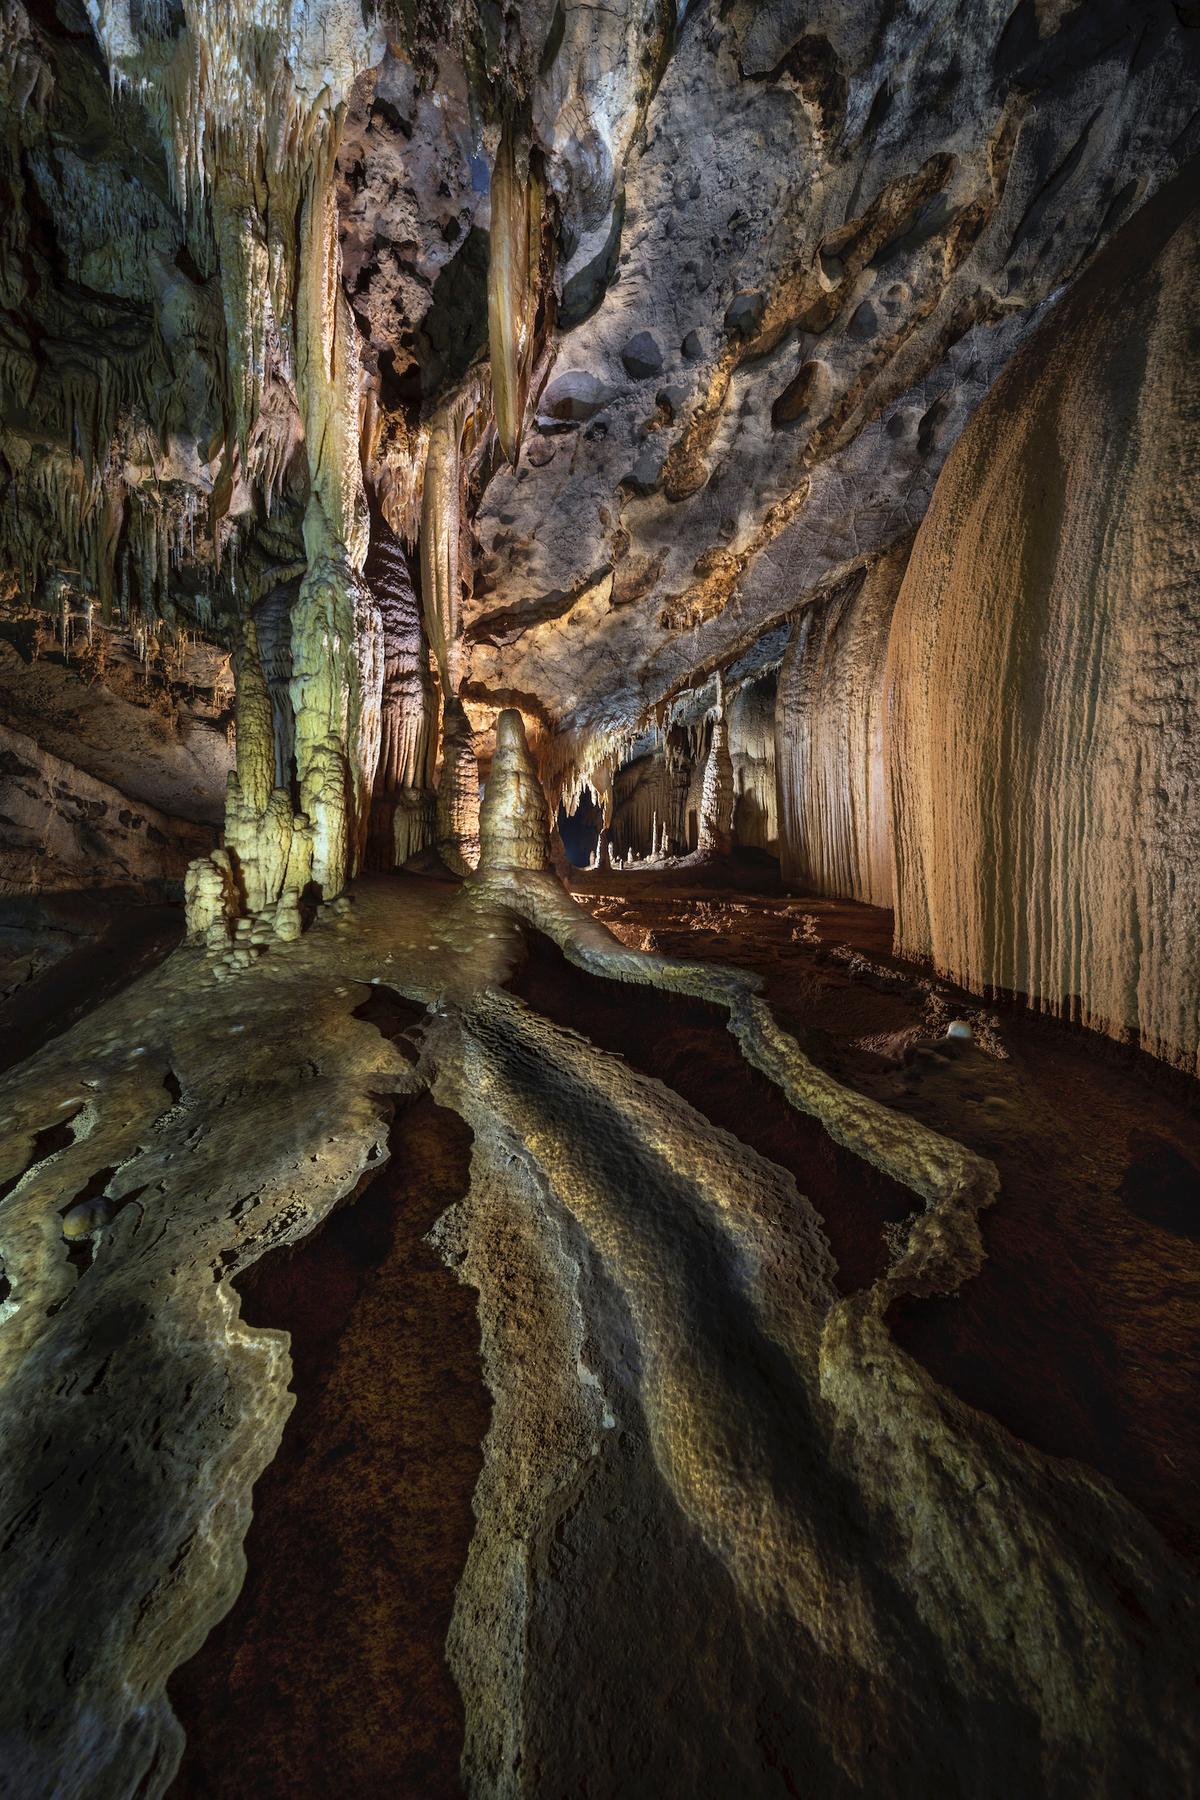 The interior of Hung Cave. (Courtesy of Nguyen Hai via Jungle Boss Tours)